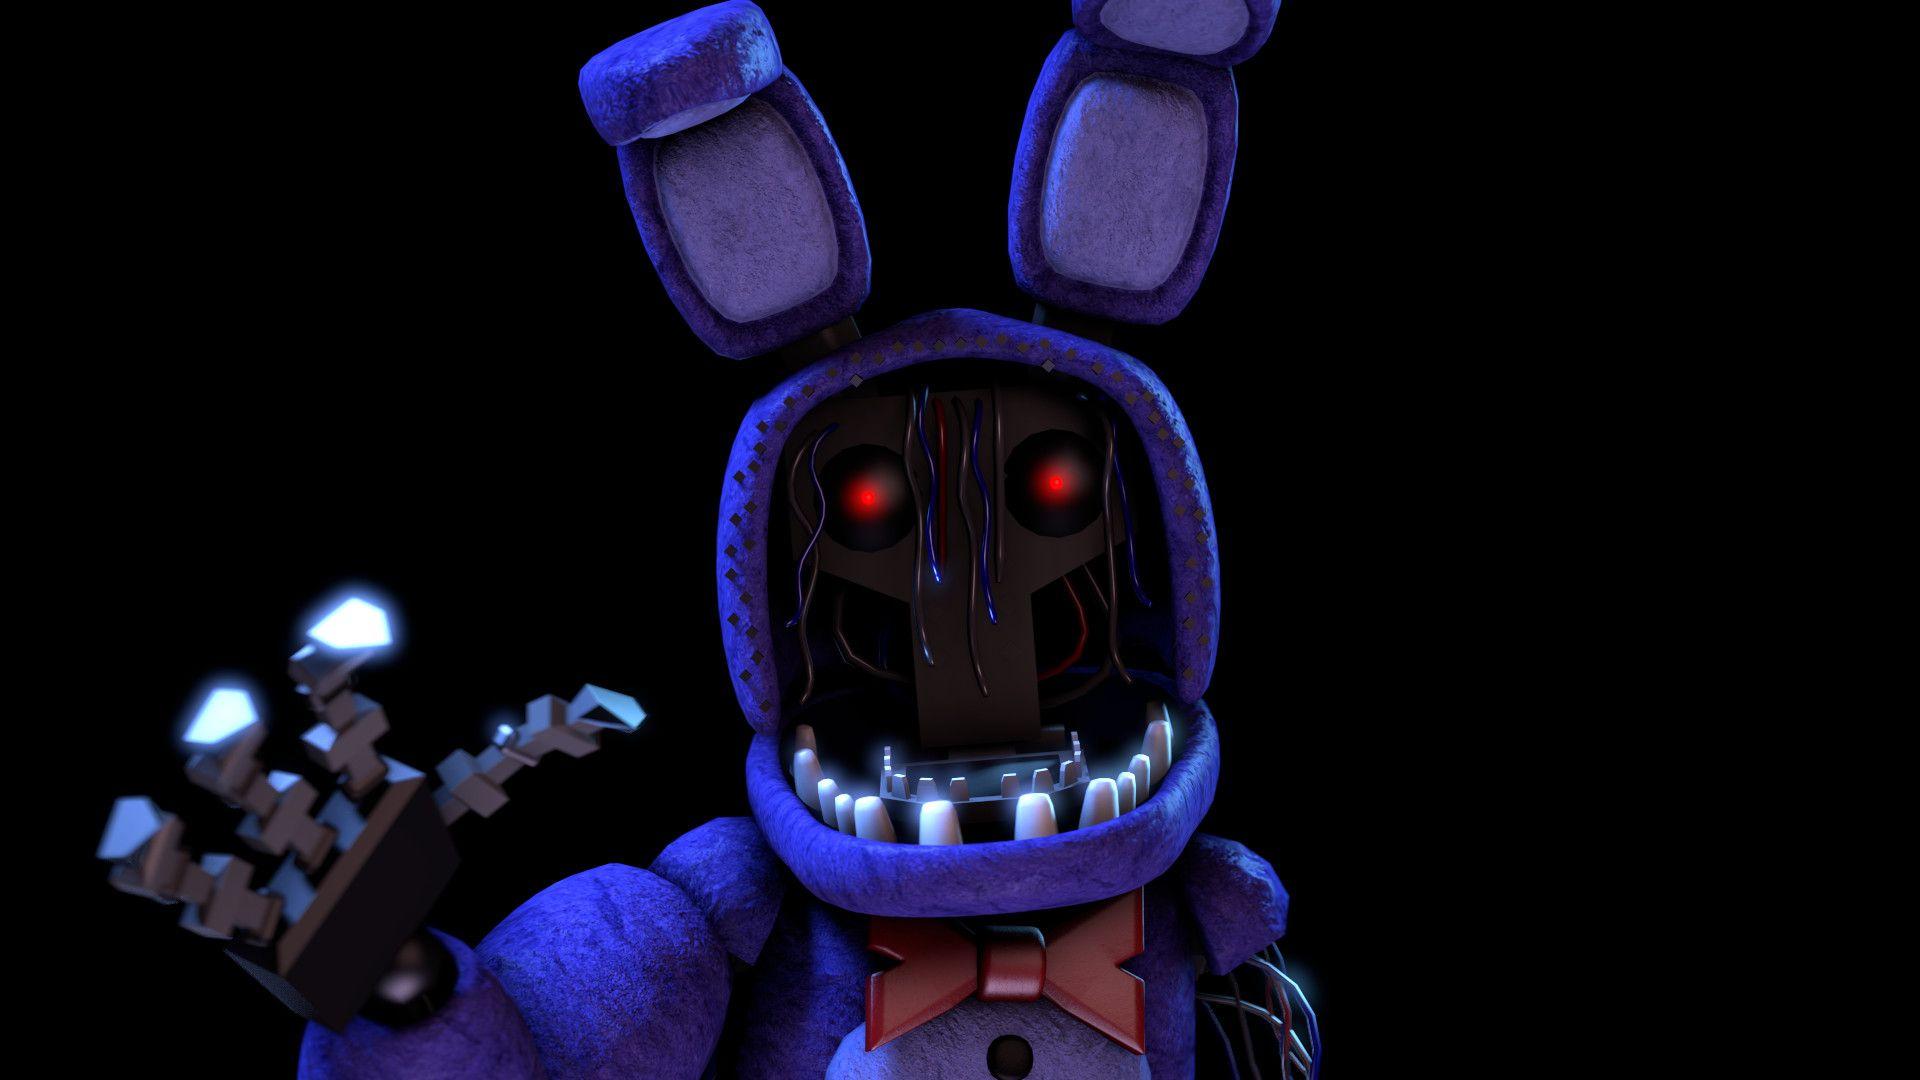 Old Bonnie Wallpapers.